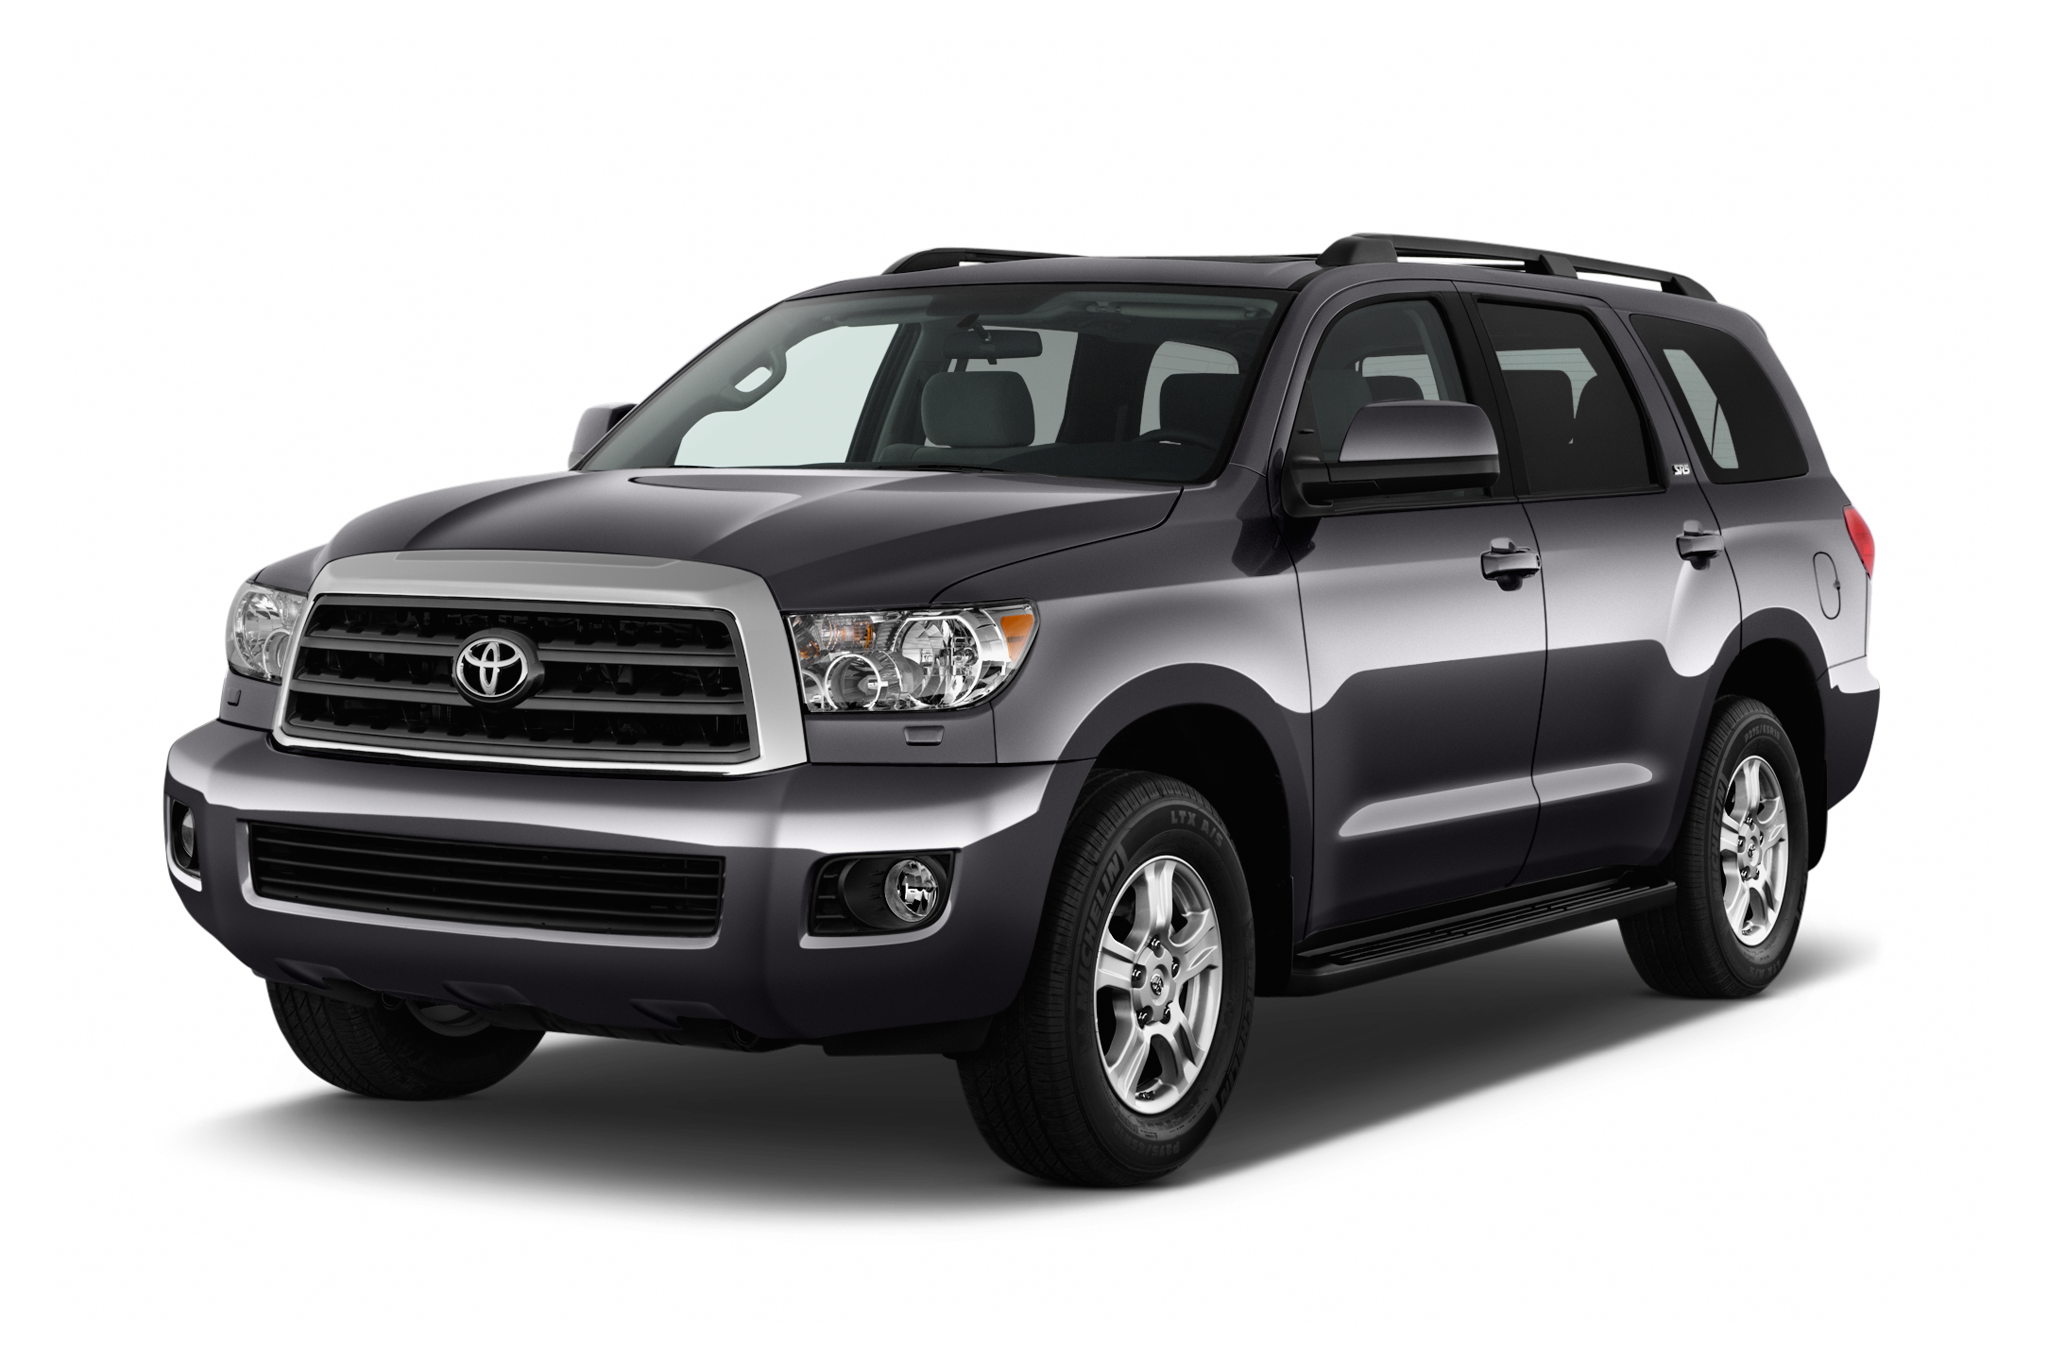 Toyota SUV International Prices & Overview